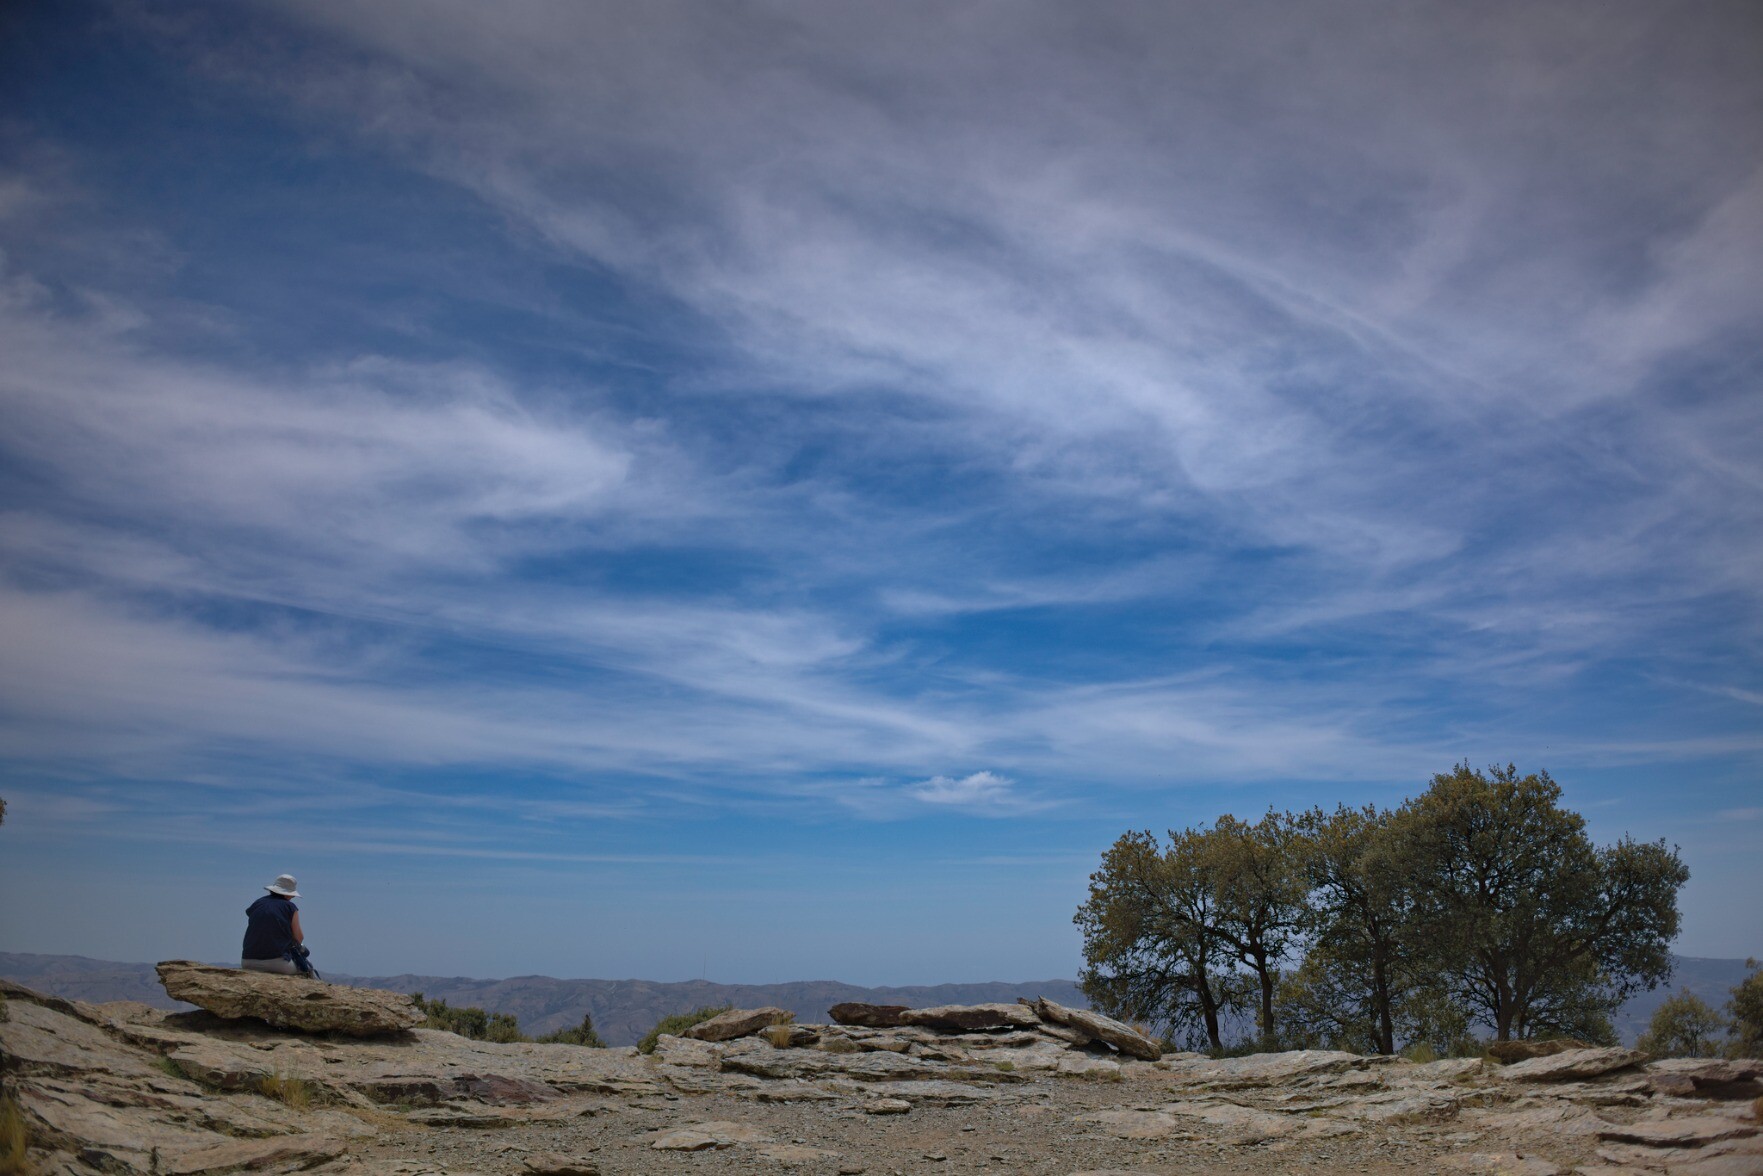 A person sits at the bottom left of the image enjoying the view. Above is a huge sky filled with wispy clouds. Some trees are to the right